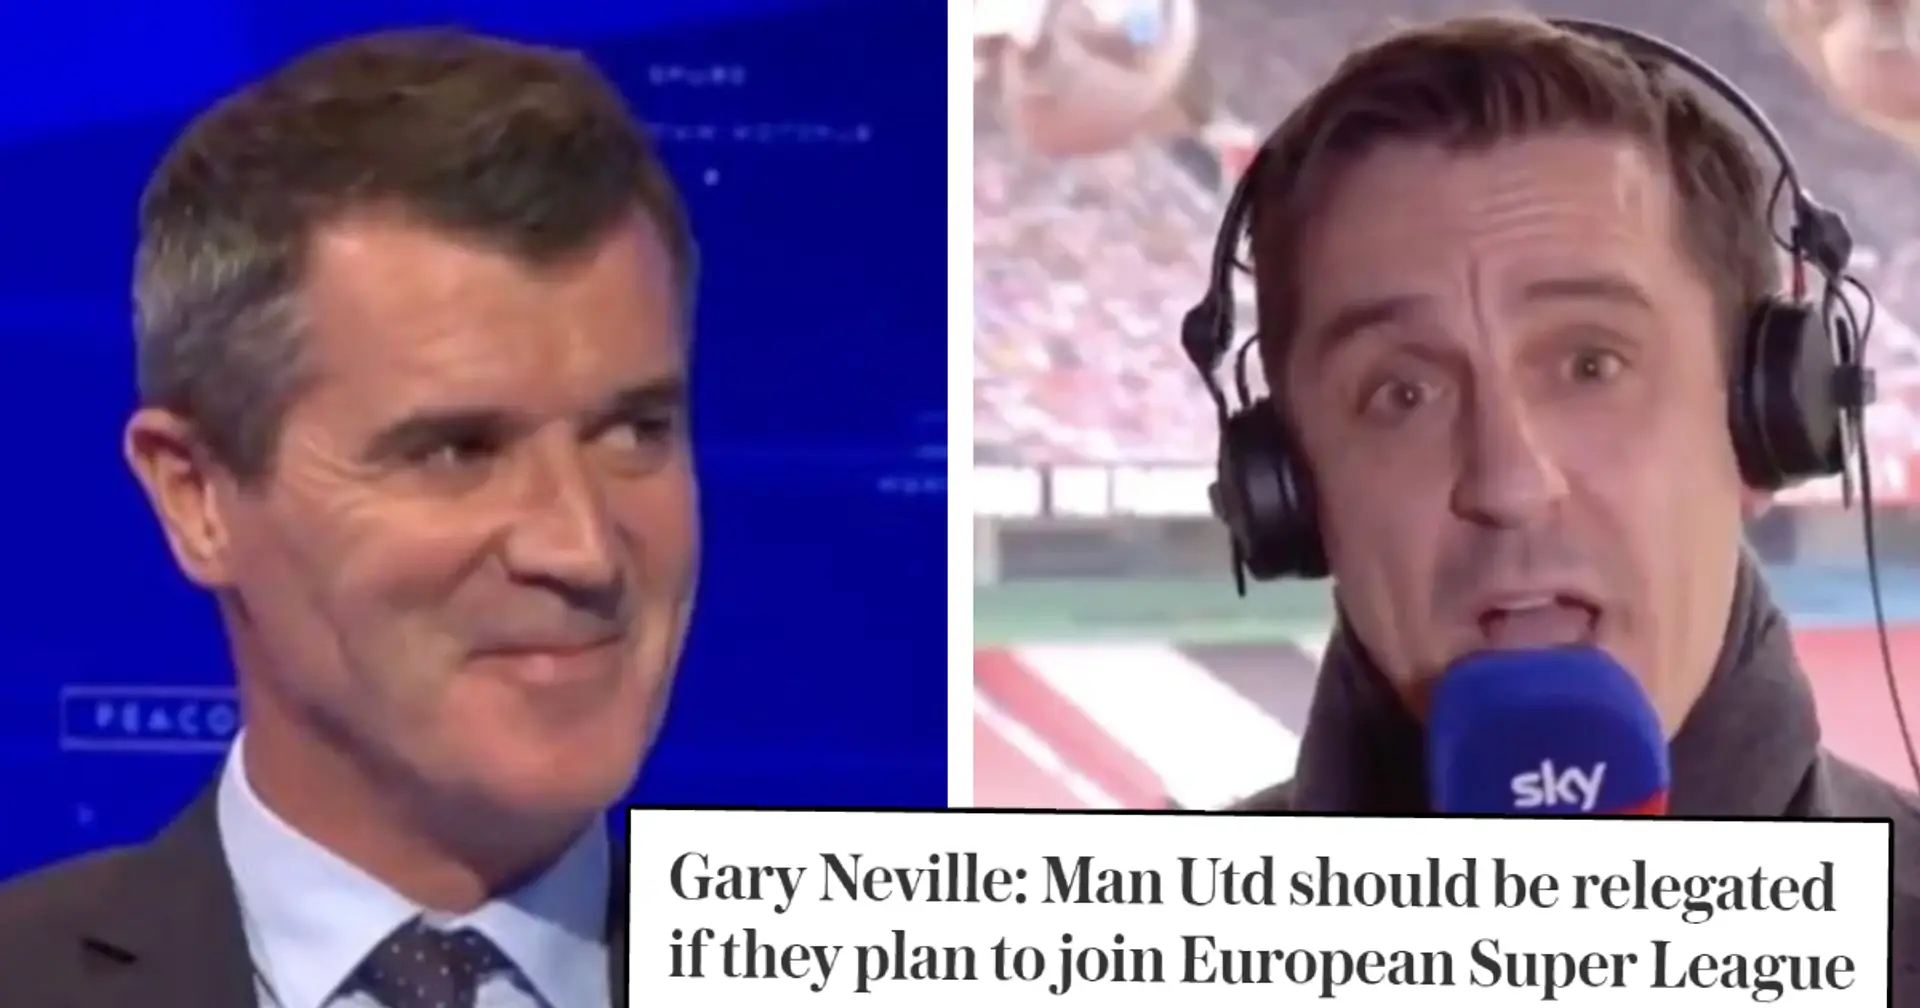 Roy Keane aims hilarious dig at Gary Neville for Super League rant